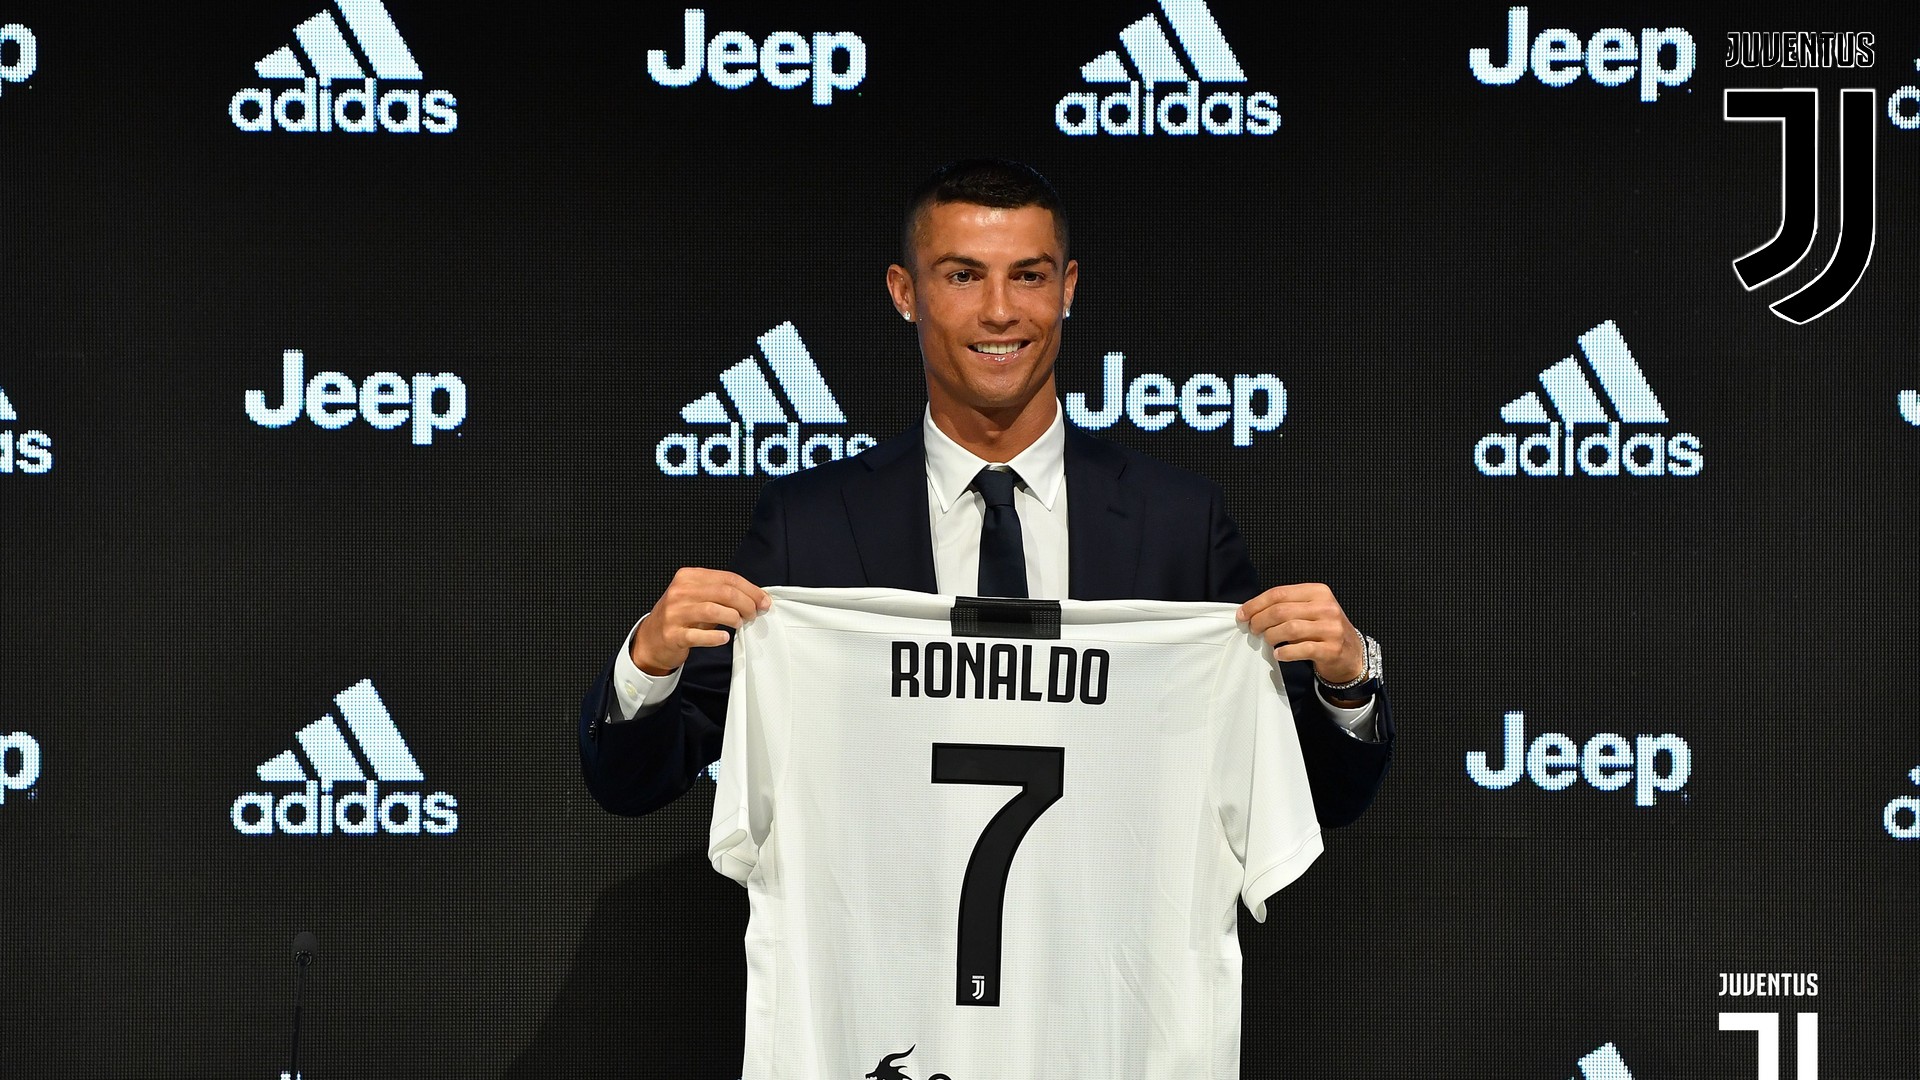 Cristiano Ronaldo Juventus HD Wallpapers With Resolution 1920X1080 pixel. You can make this wallpaper for your Mac or Windows Desktop Background, iPhone, Android or Tablet and another Smartphone device for free